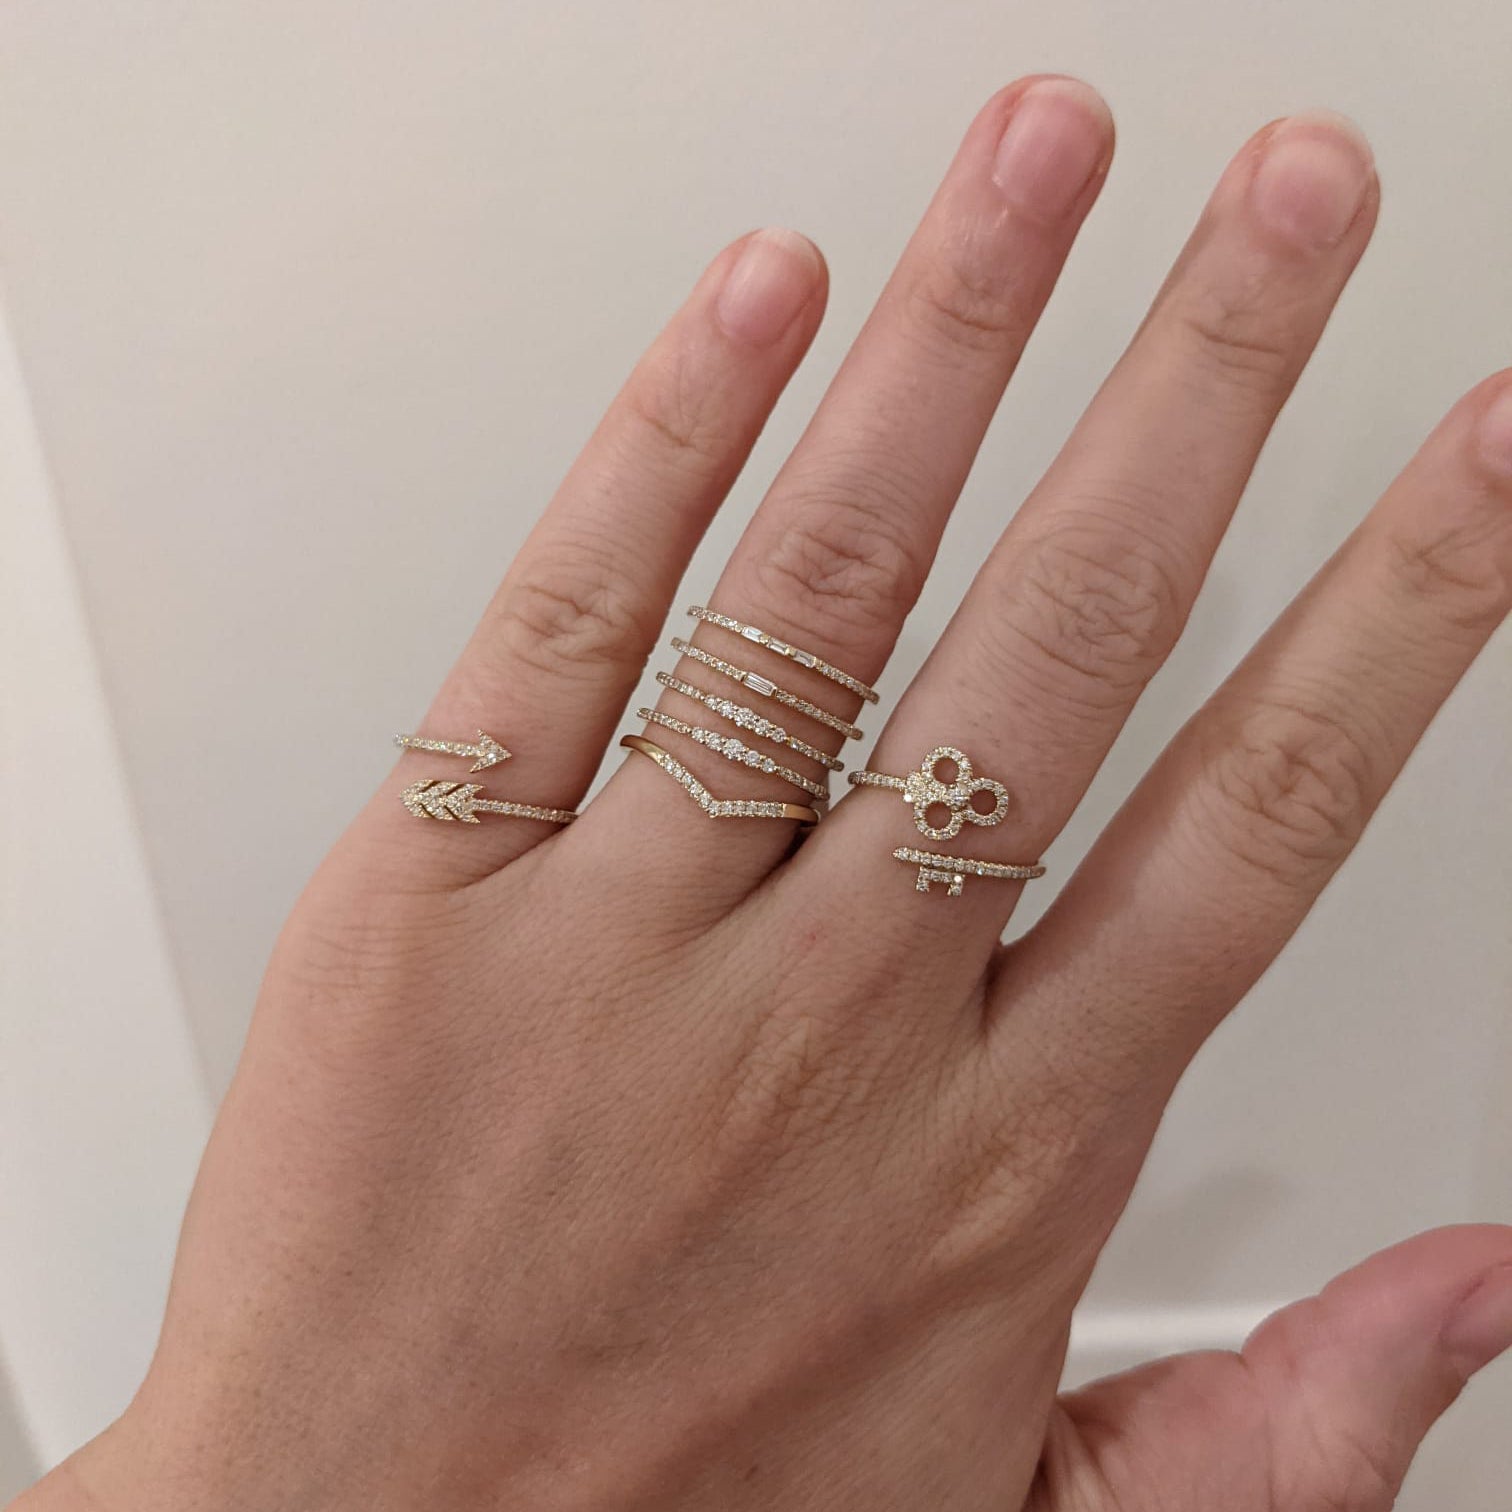 Solid Gold Dainty Diamond Ring | Dainty diamond ring, Cute promise rings, Small  diamond rings